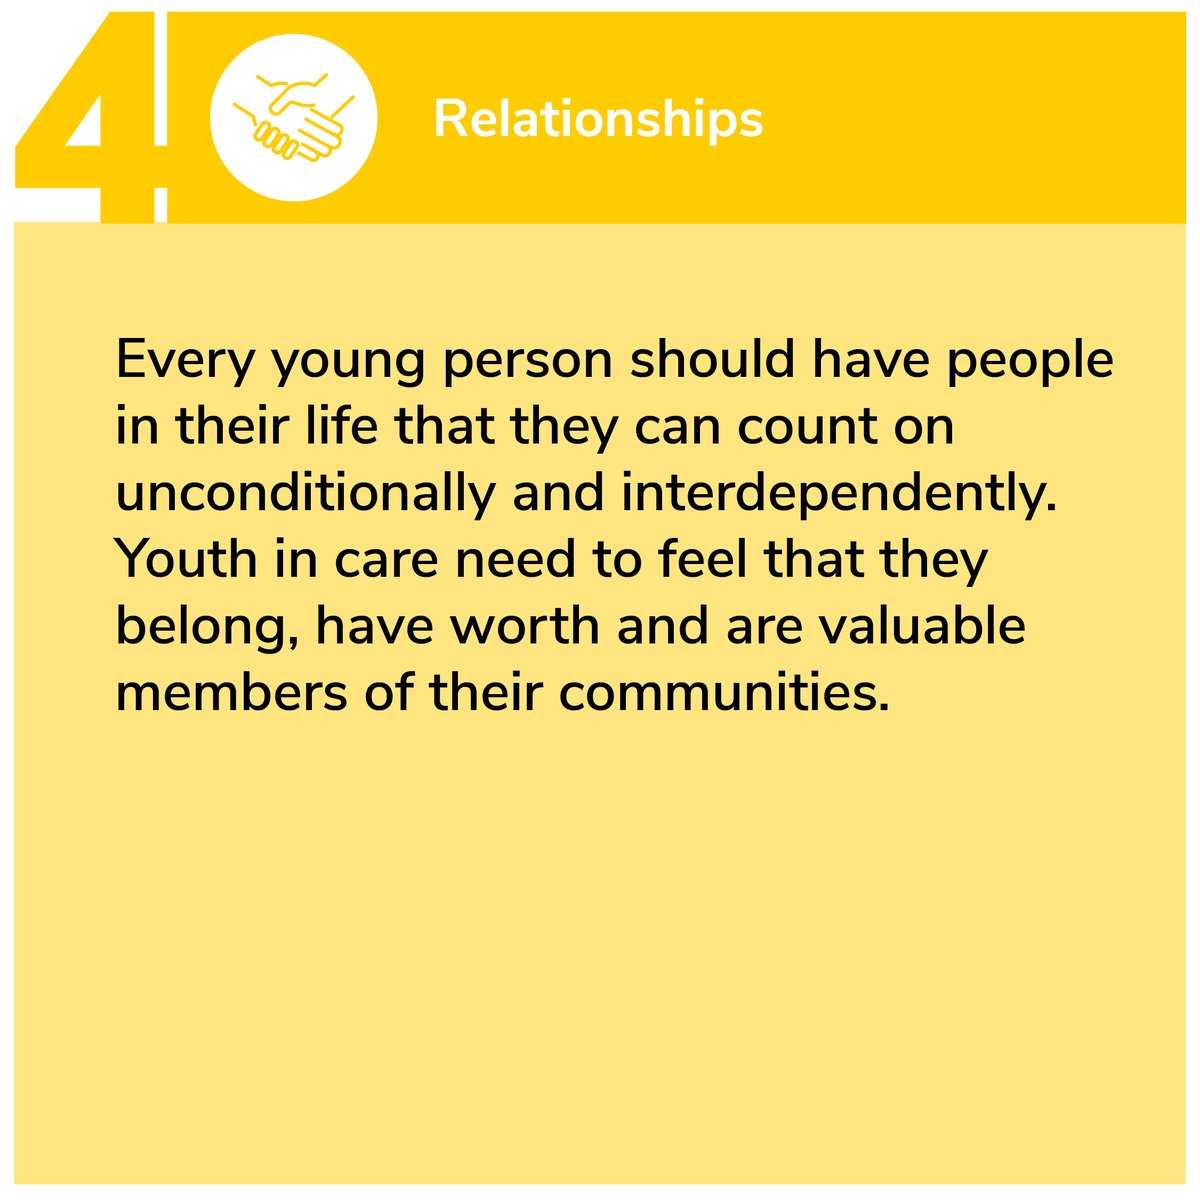 @MelanieMDoucet research confirms importance of long-term supportive relationships for #youthincare aligning w/Equitable Standards Key Supports Checklist Pillar 4 loom.ly/KoJOnak Relationships Matter project 👉🏼 loom.ly/jjLWTbw #StandWithYouthInCare #childwelfare